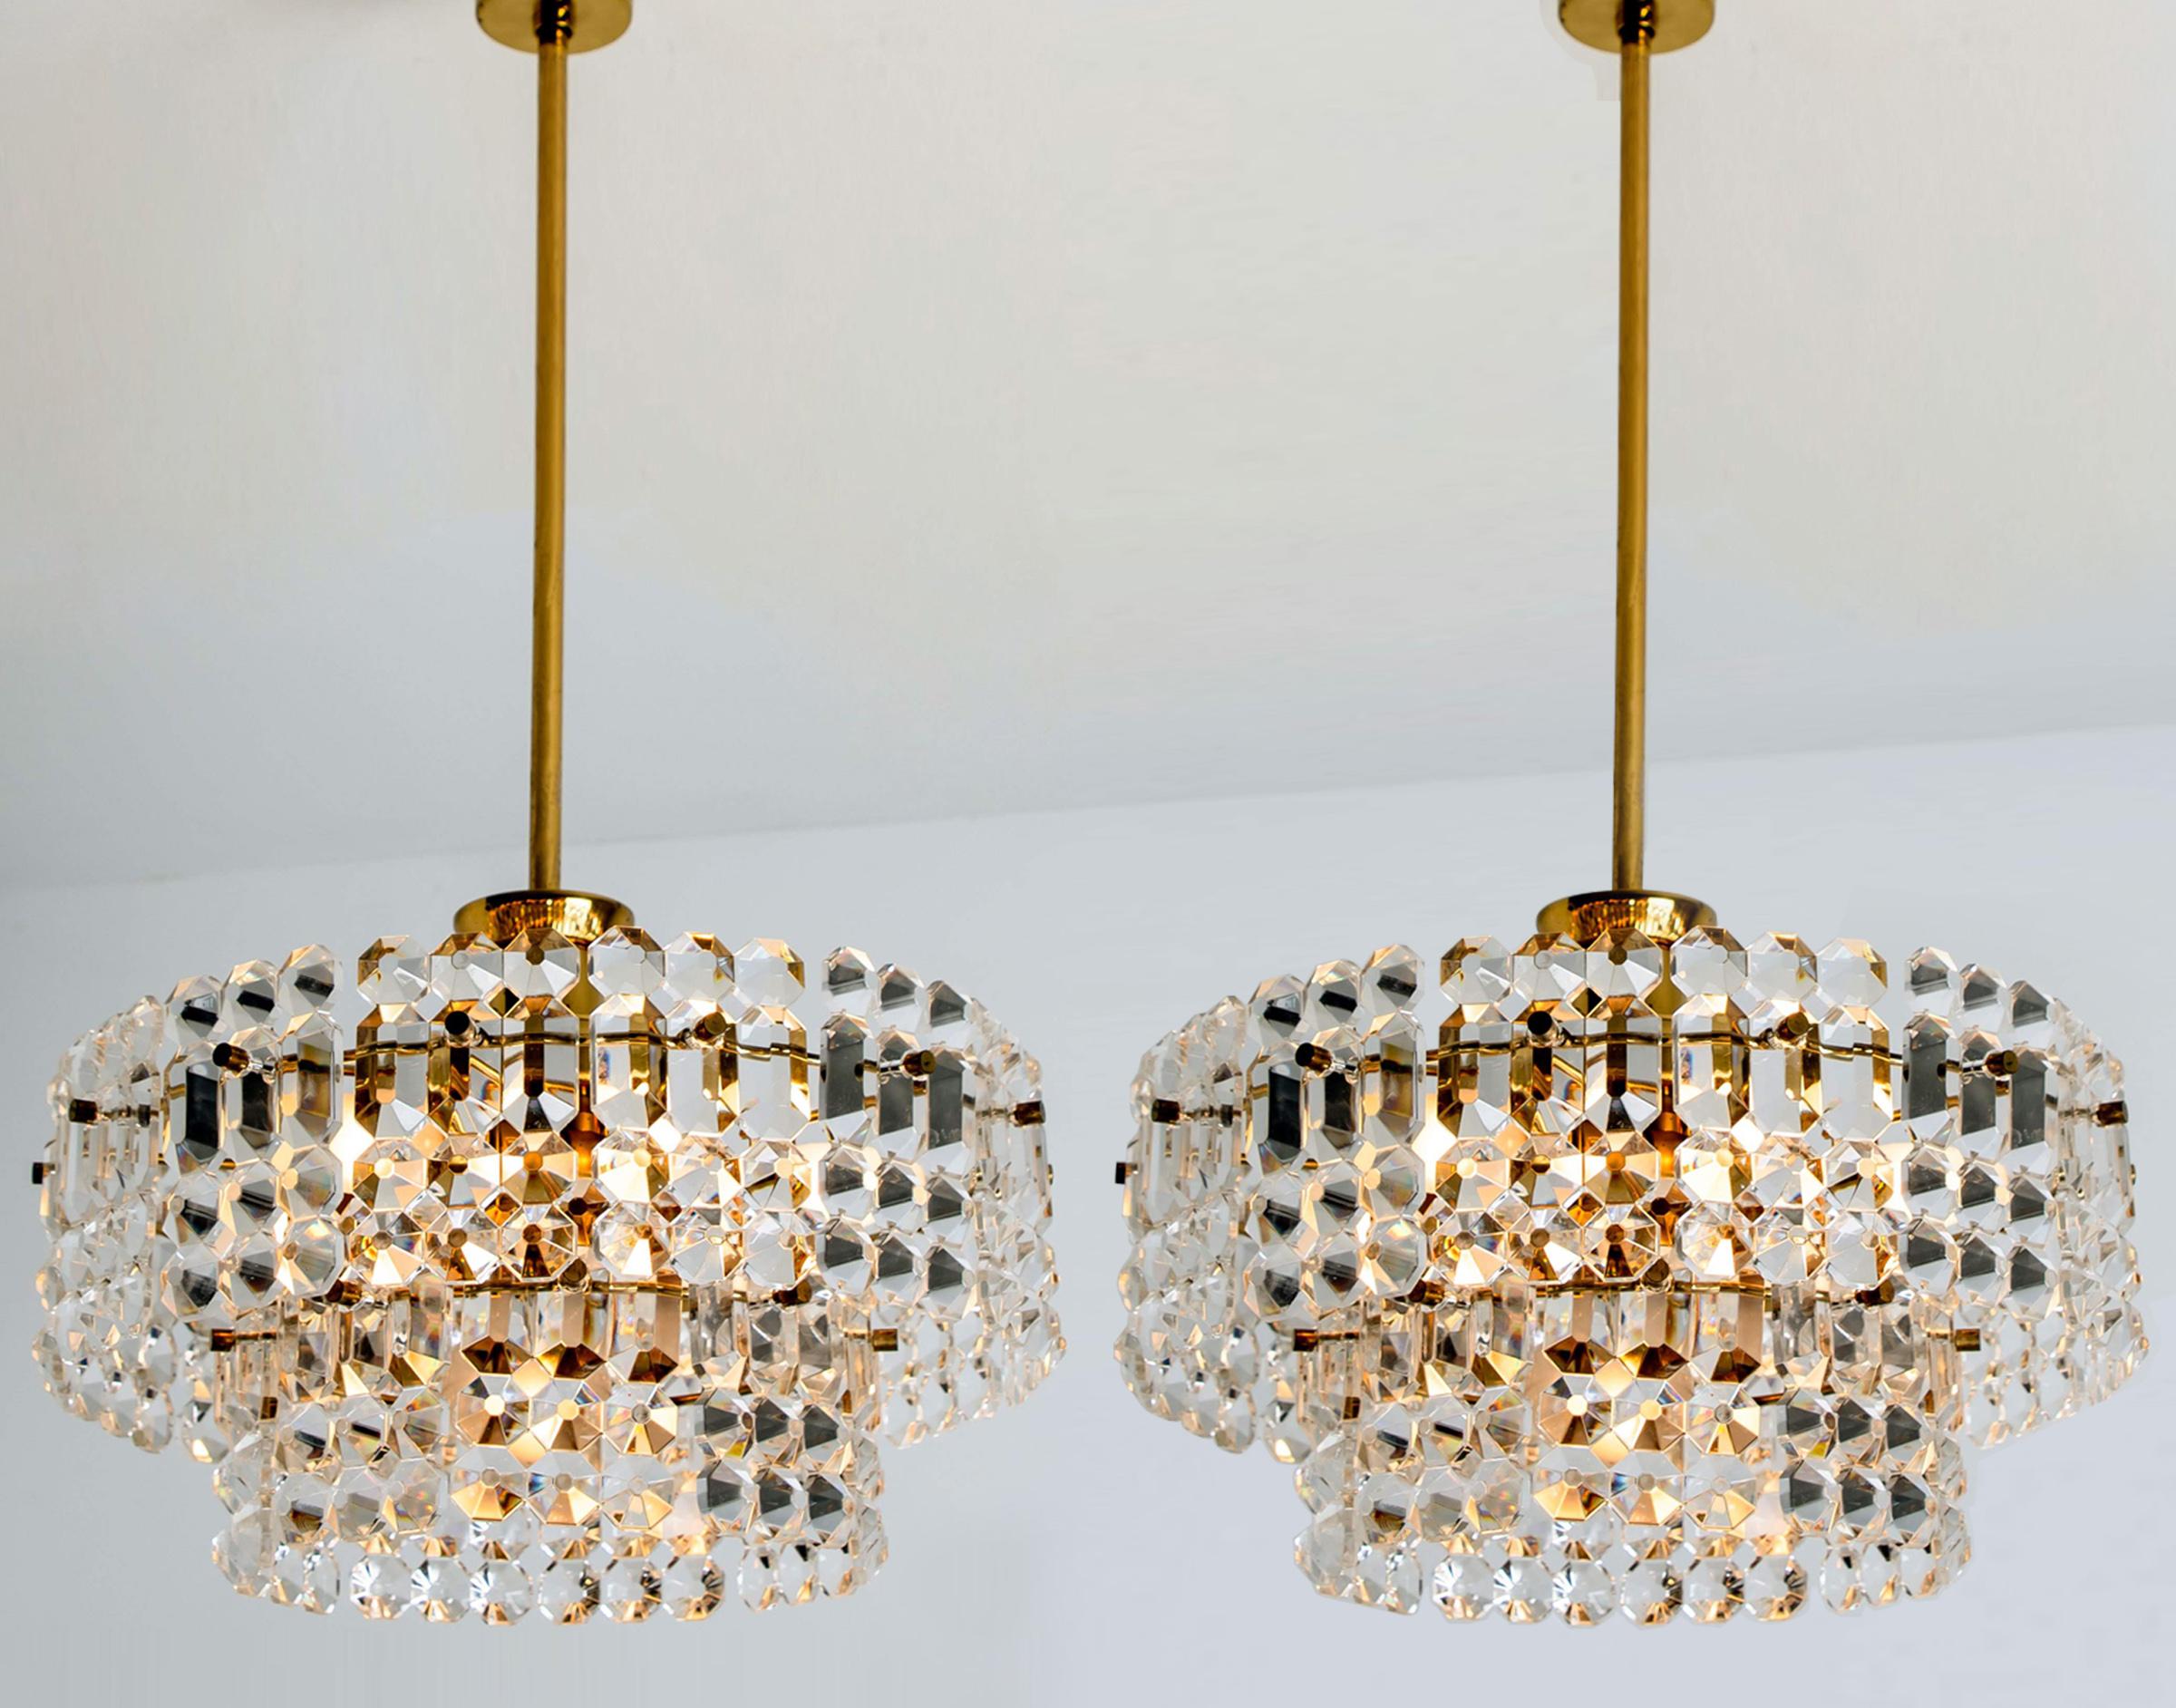 This modernist design chandeliers where designed by the Kinkeldey design team during the 1970s, and manufactured in Germany. A handmade and high quality piece. A set of four is rare to find. Two chandeliers and 2 wall lights.

The small crystals